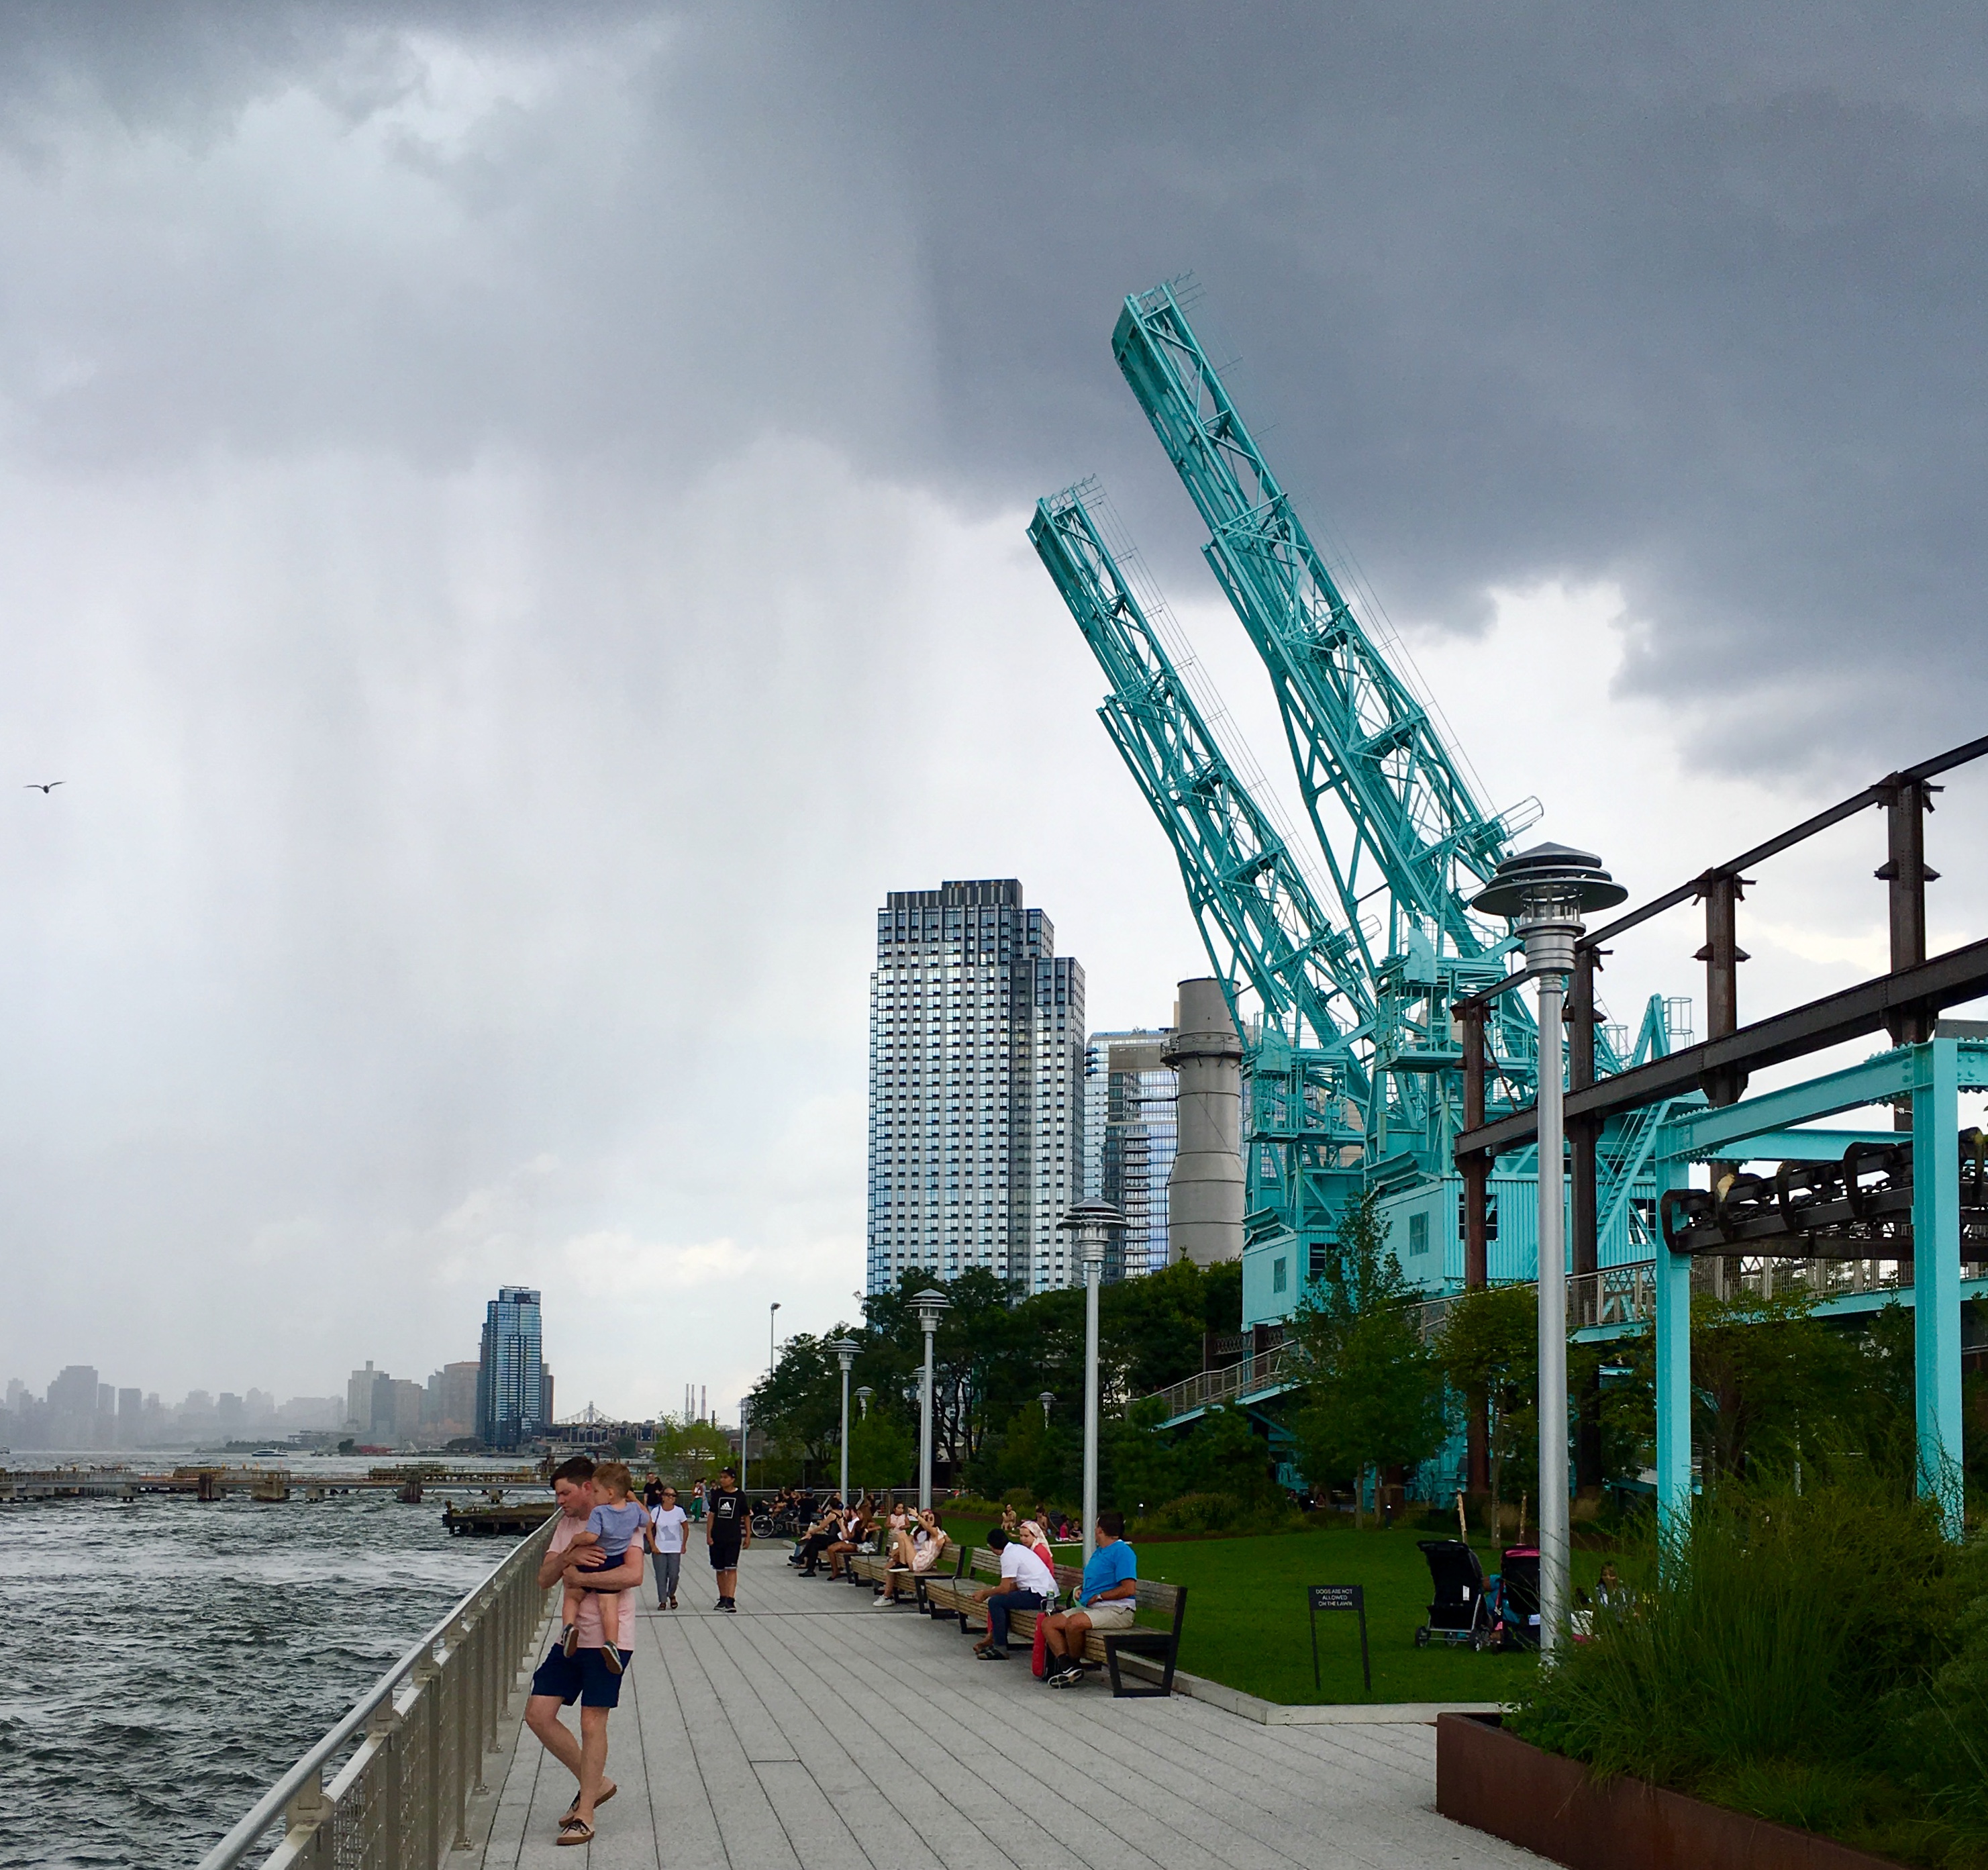 Domino Park’s gantry cranes stand tall as a storm approaches. Eagle photo by Lore Croghan